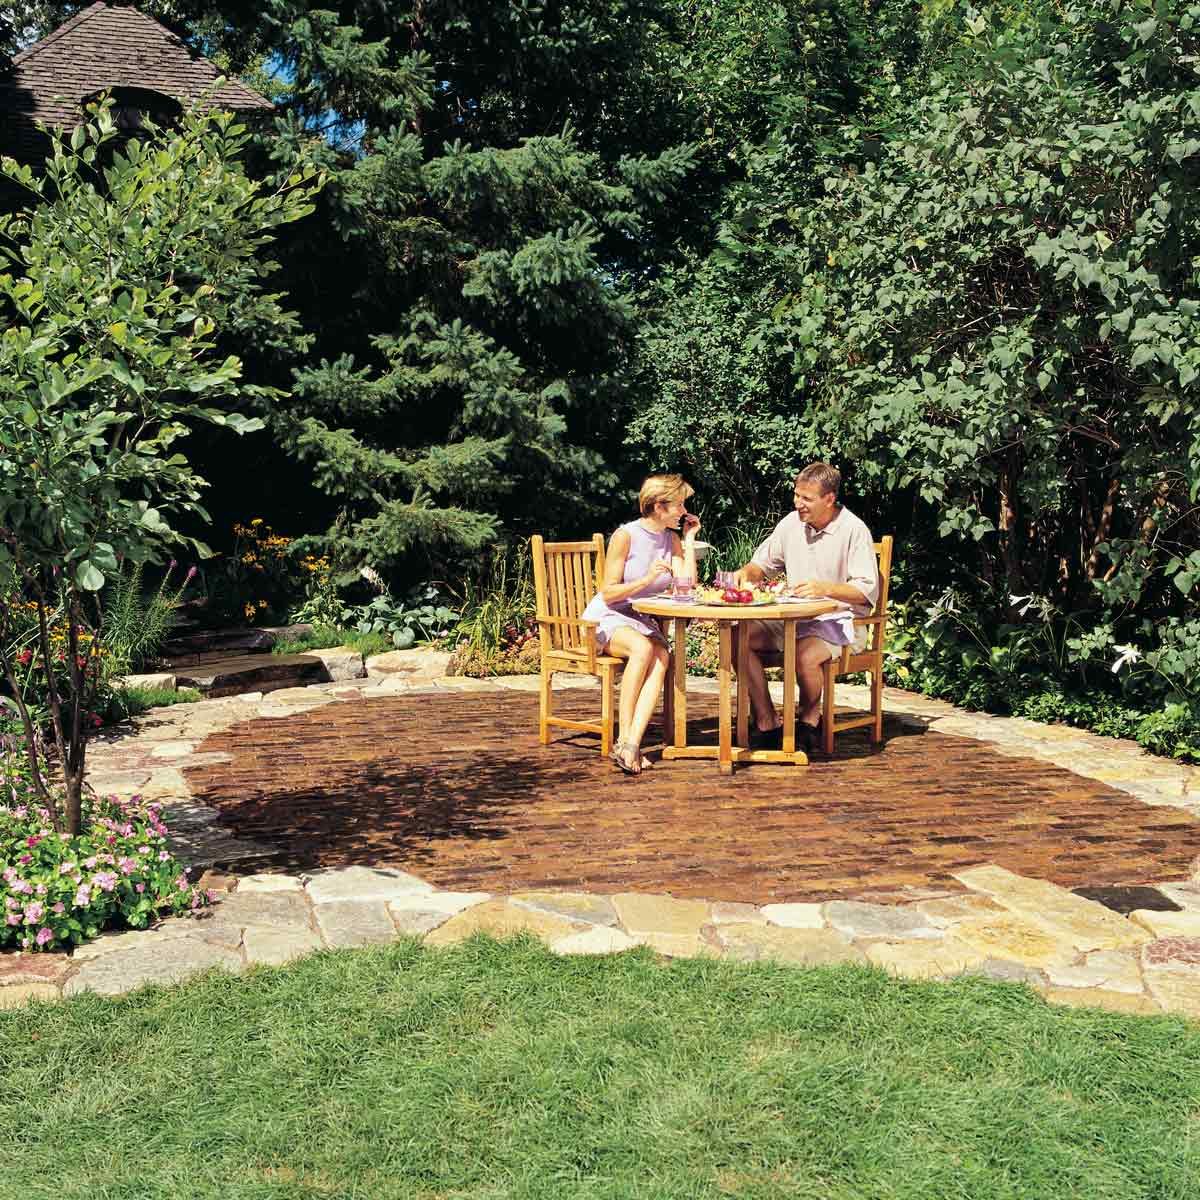 How To Build a Stone and Brick Patio for Your Backyard